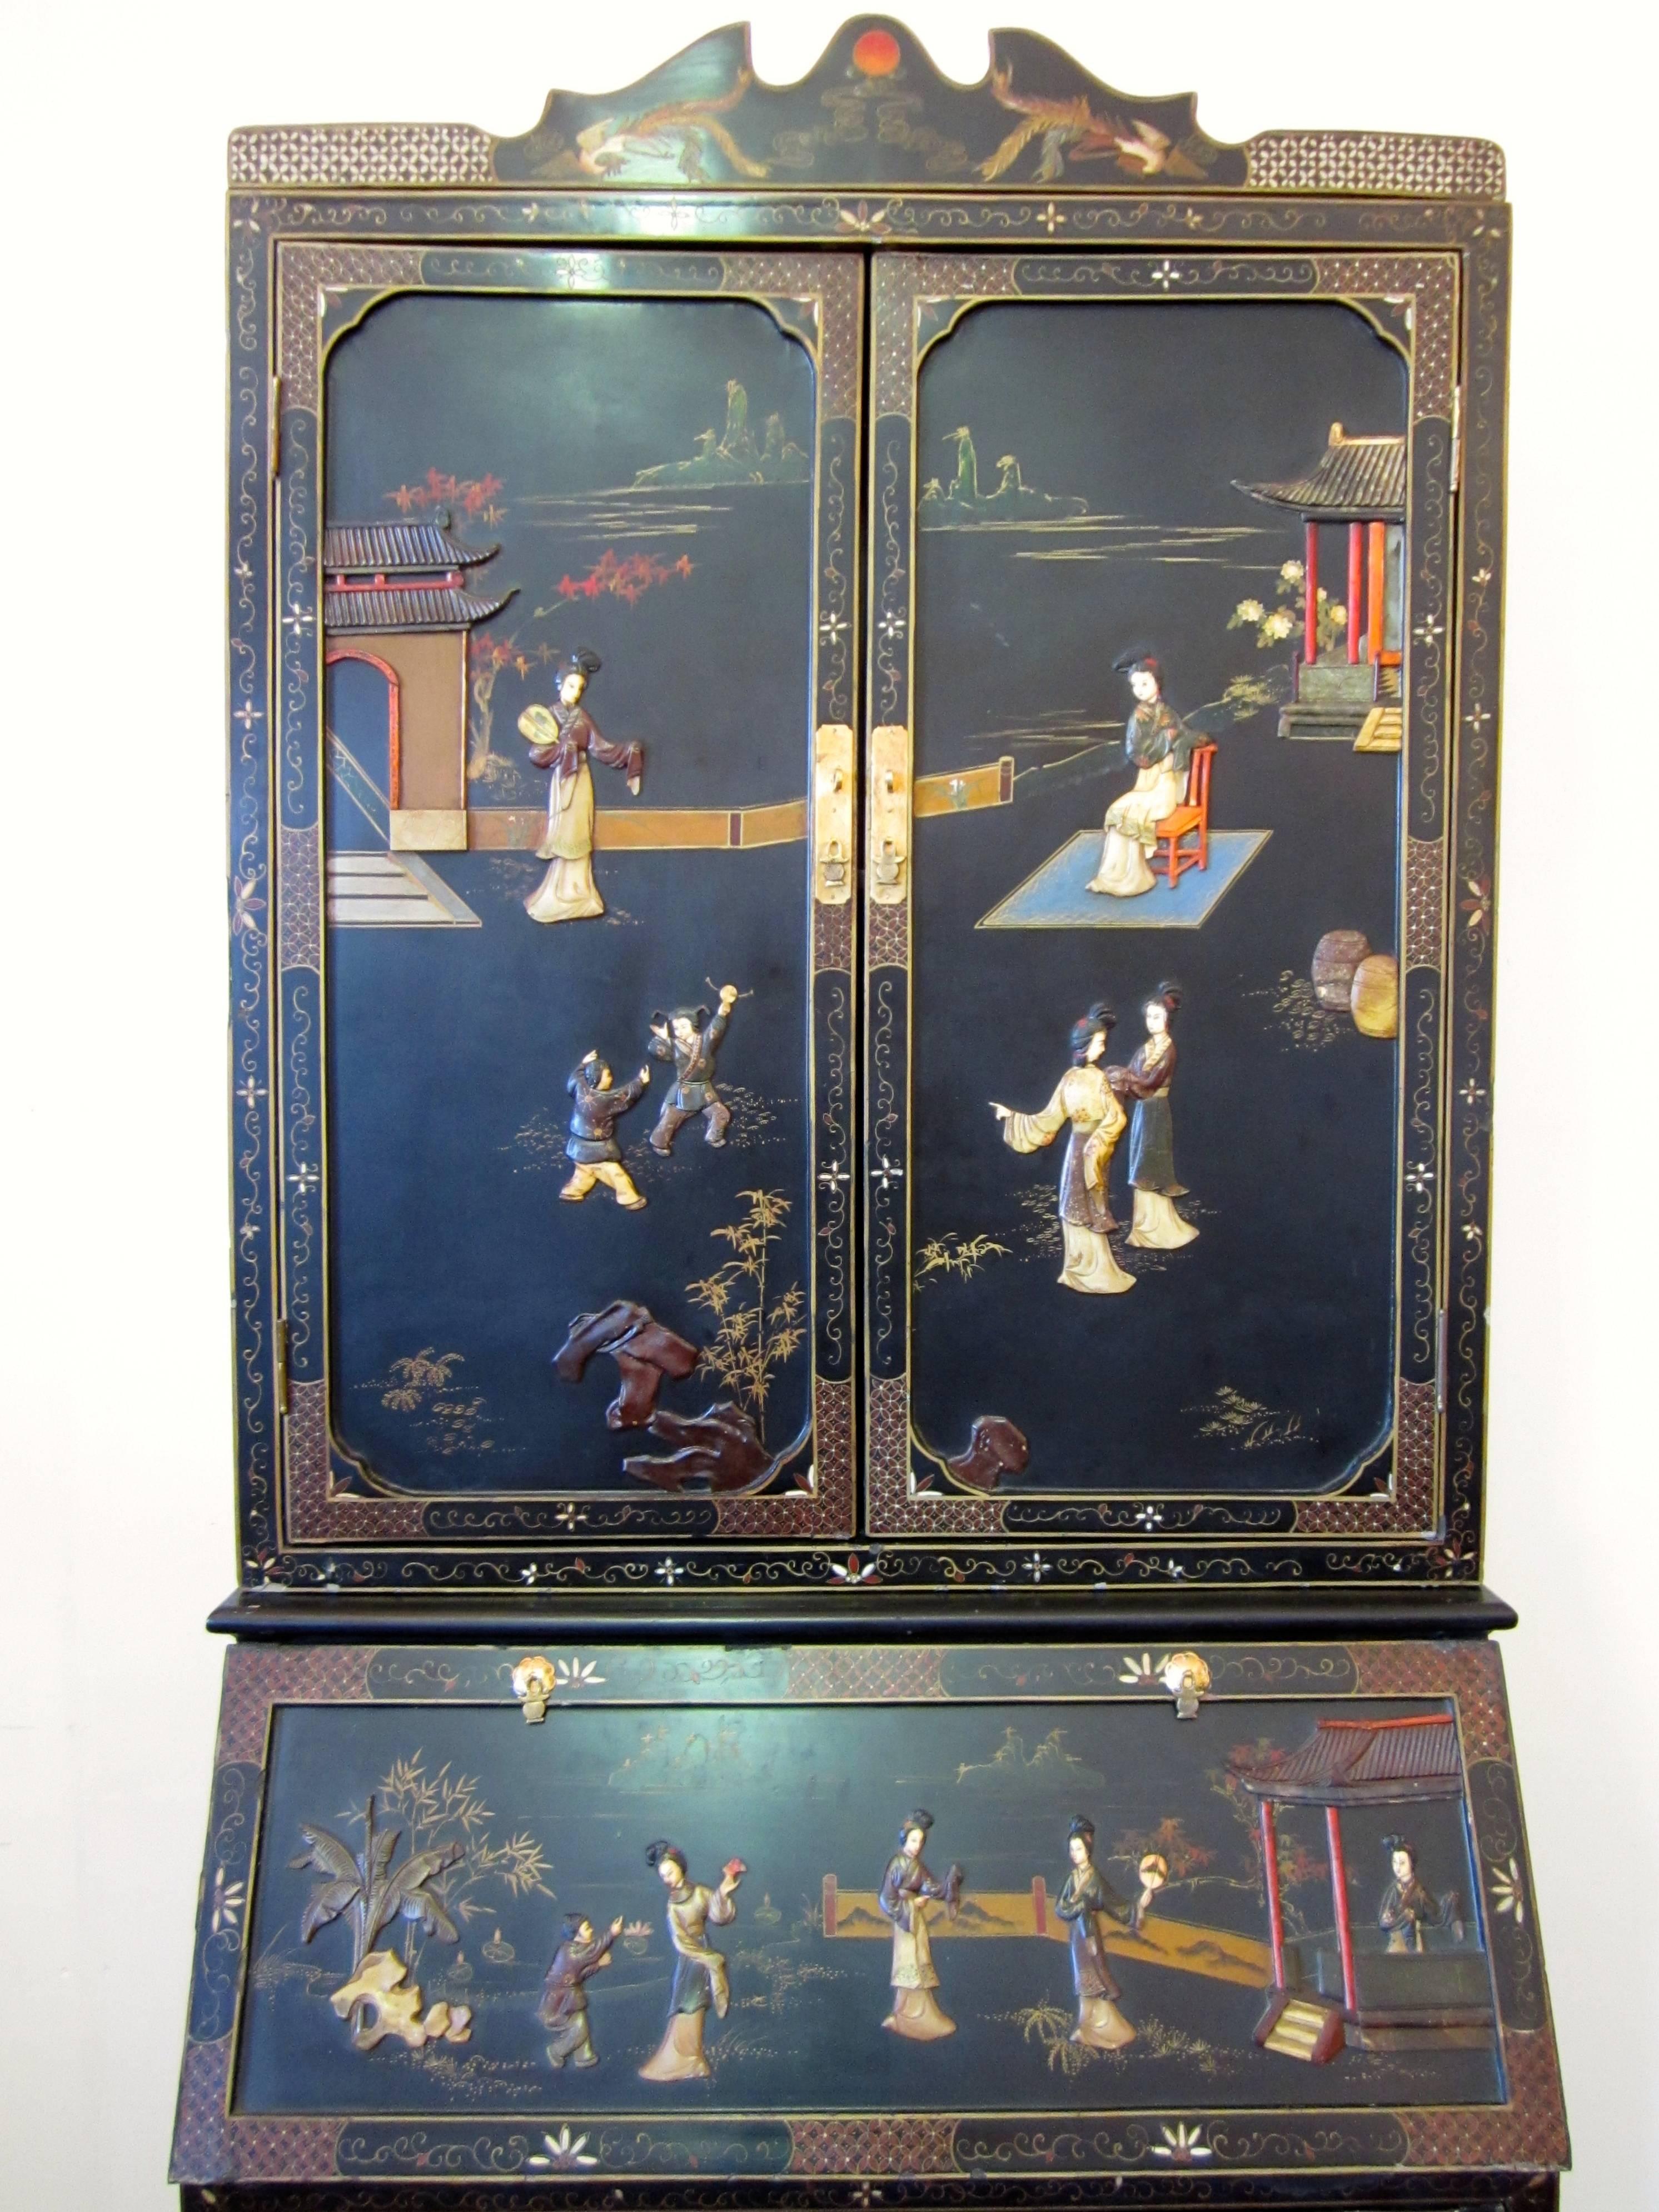 Chinese black lacquered wood cabinet with figures and village scenes made by steatite, semiprecious stones, bone and lacquered wood.